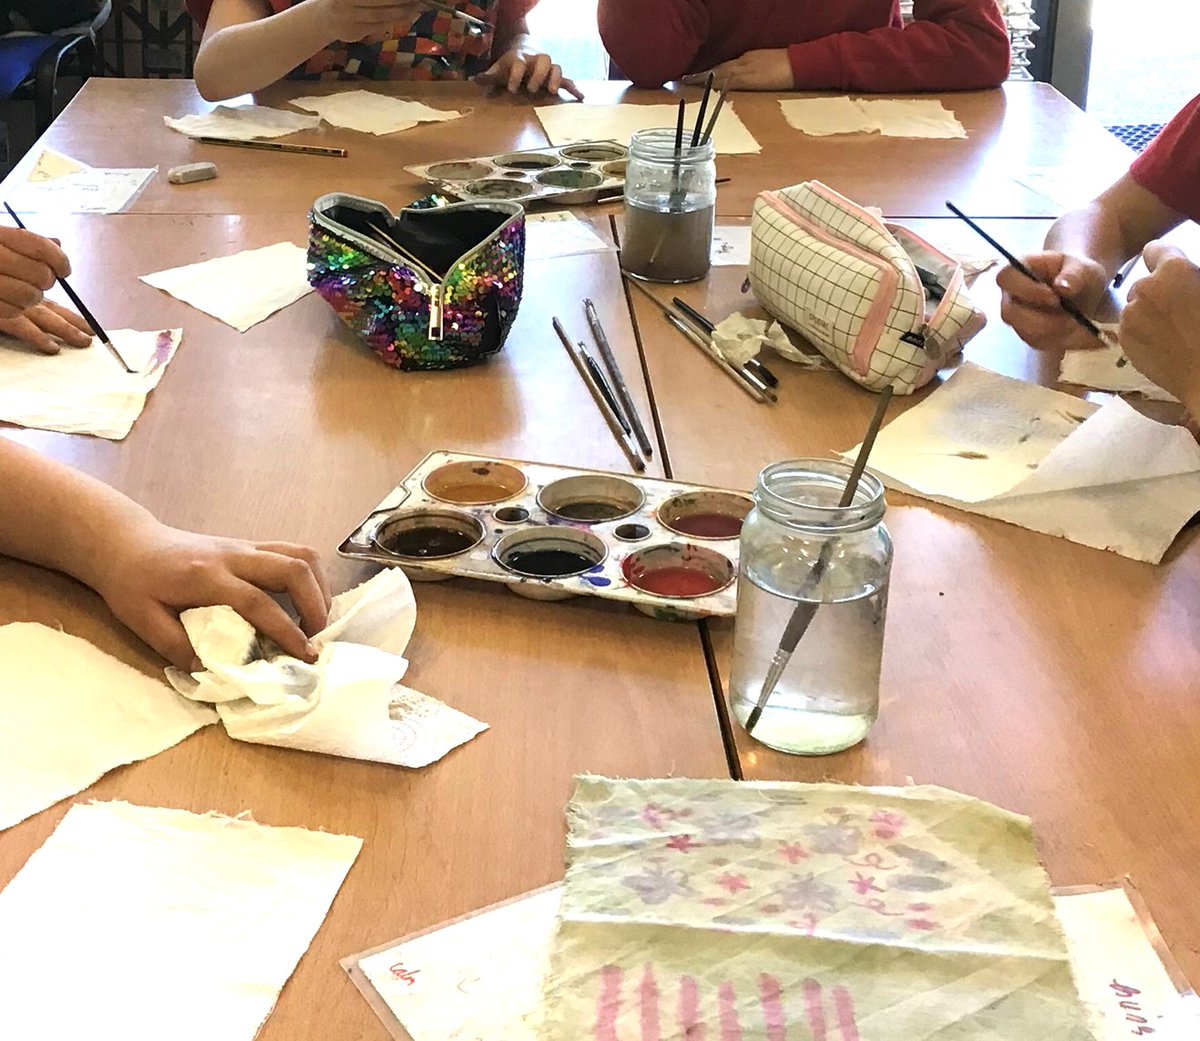 Free Family Crafts @ Farnham Sustainability Festival. Textile Collage with Natural Dye & Eco Fabrics with Charlotte Karin, 11 Jun, 12-5. Bring old fabrics, incl. T-shirts, tote bags or towels to colour. Supported by South Street Trust & @FarnhamOfficial